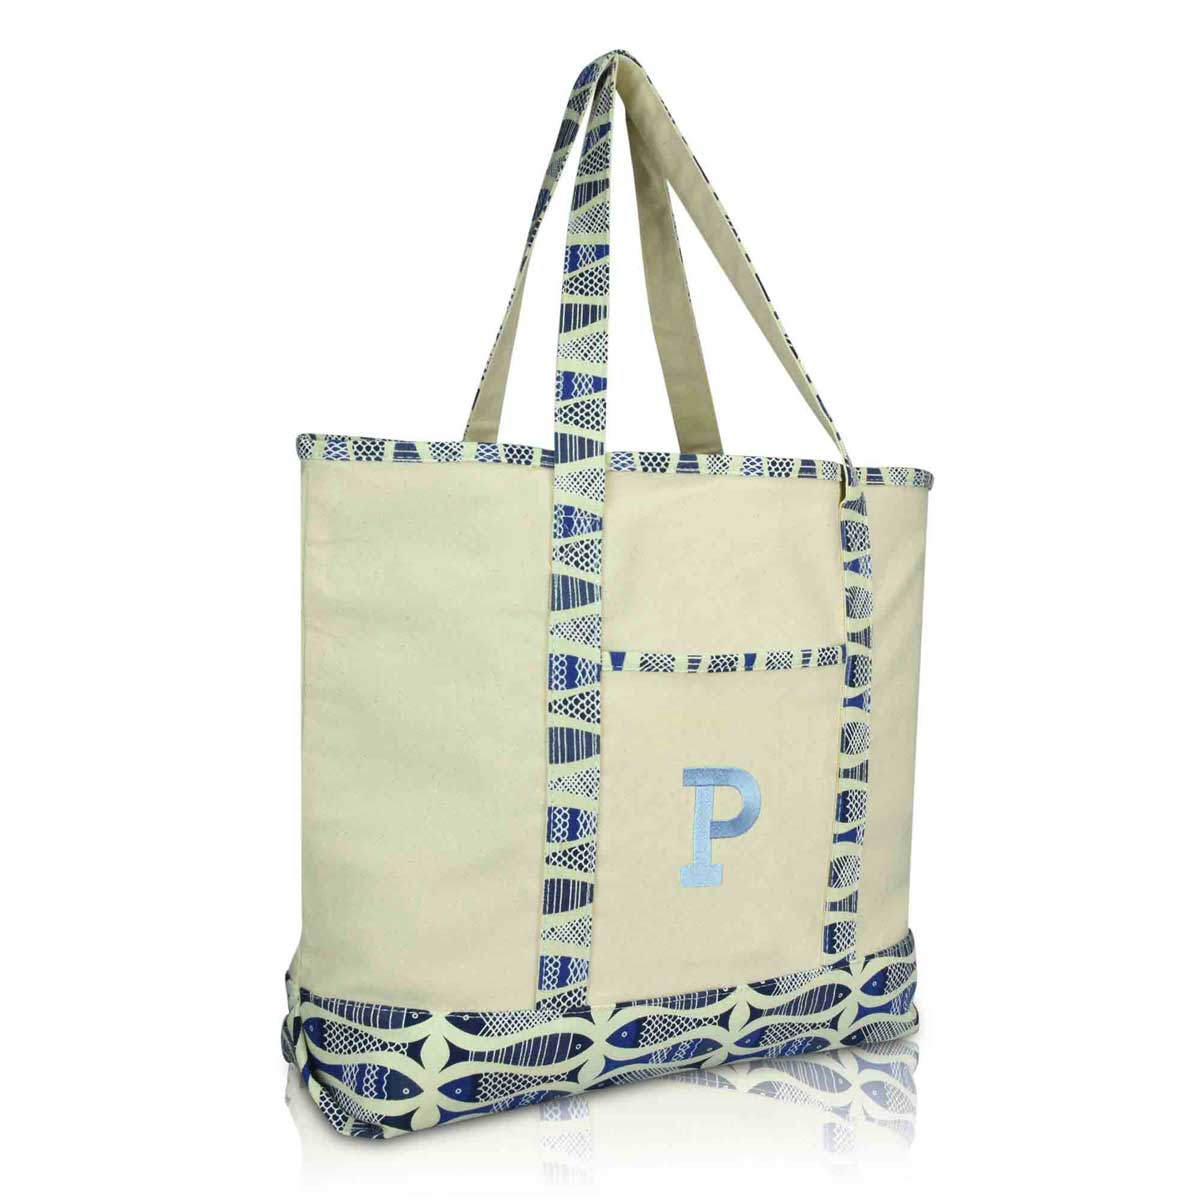 Dalix Initial Tote Bag Personalized Monogram Zippered Top Letter - P